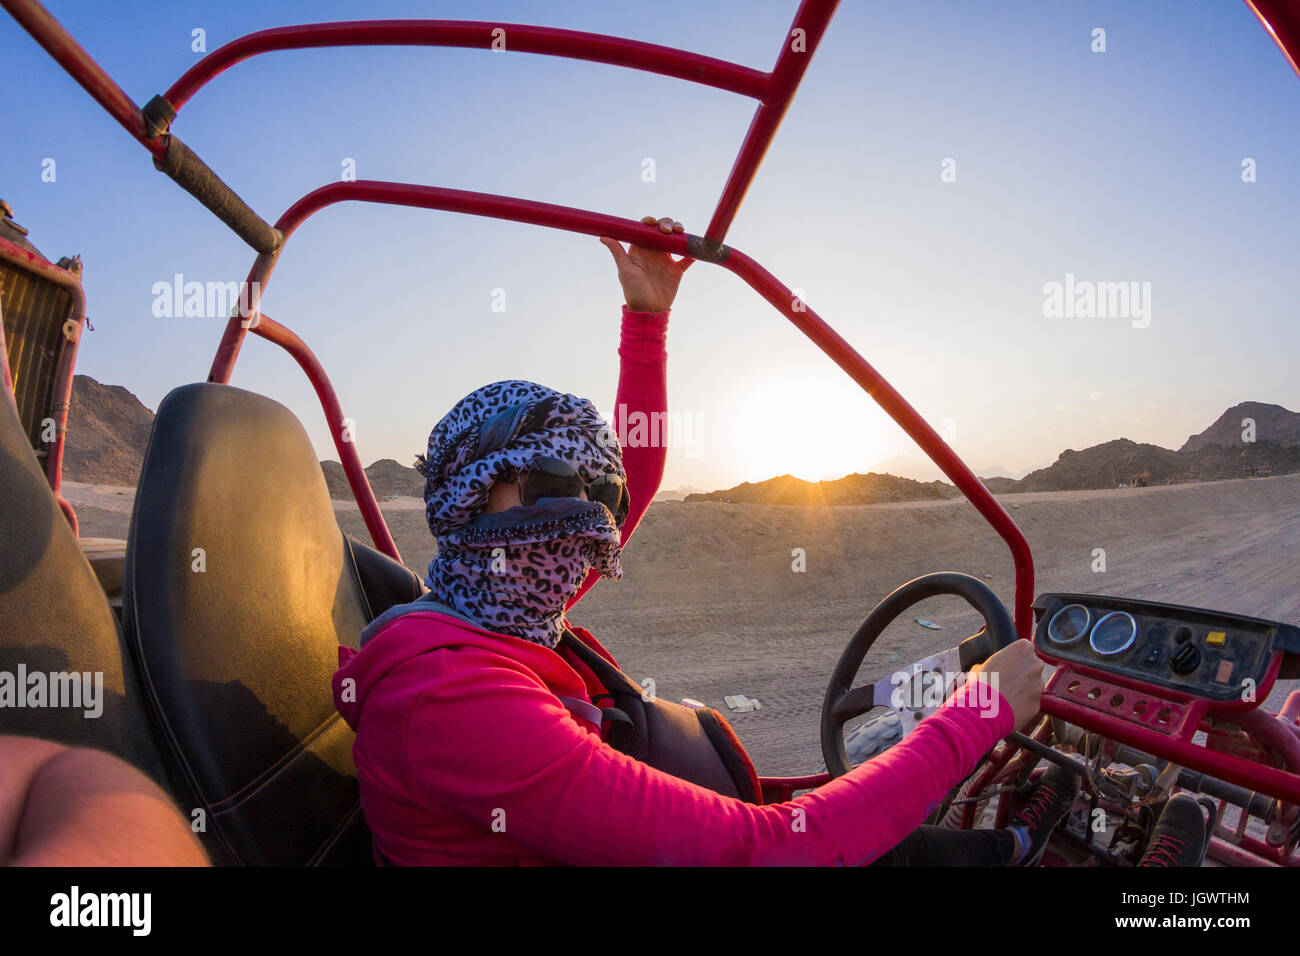 Young woman with head wrapped in scarf driving beach buggy in desert, Hurghada, Al Bahr al Ahmar, Egypt Stock Photo